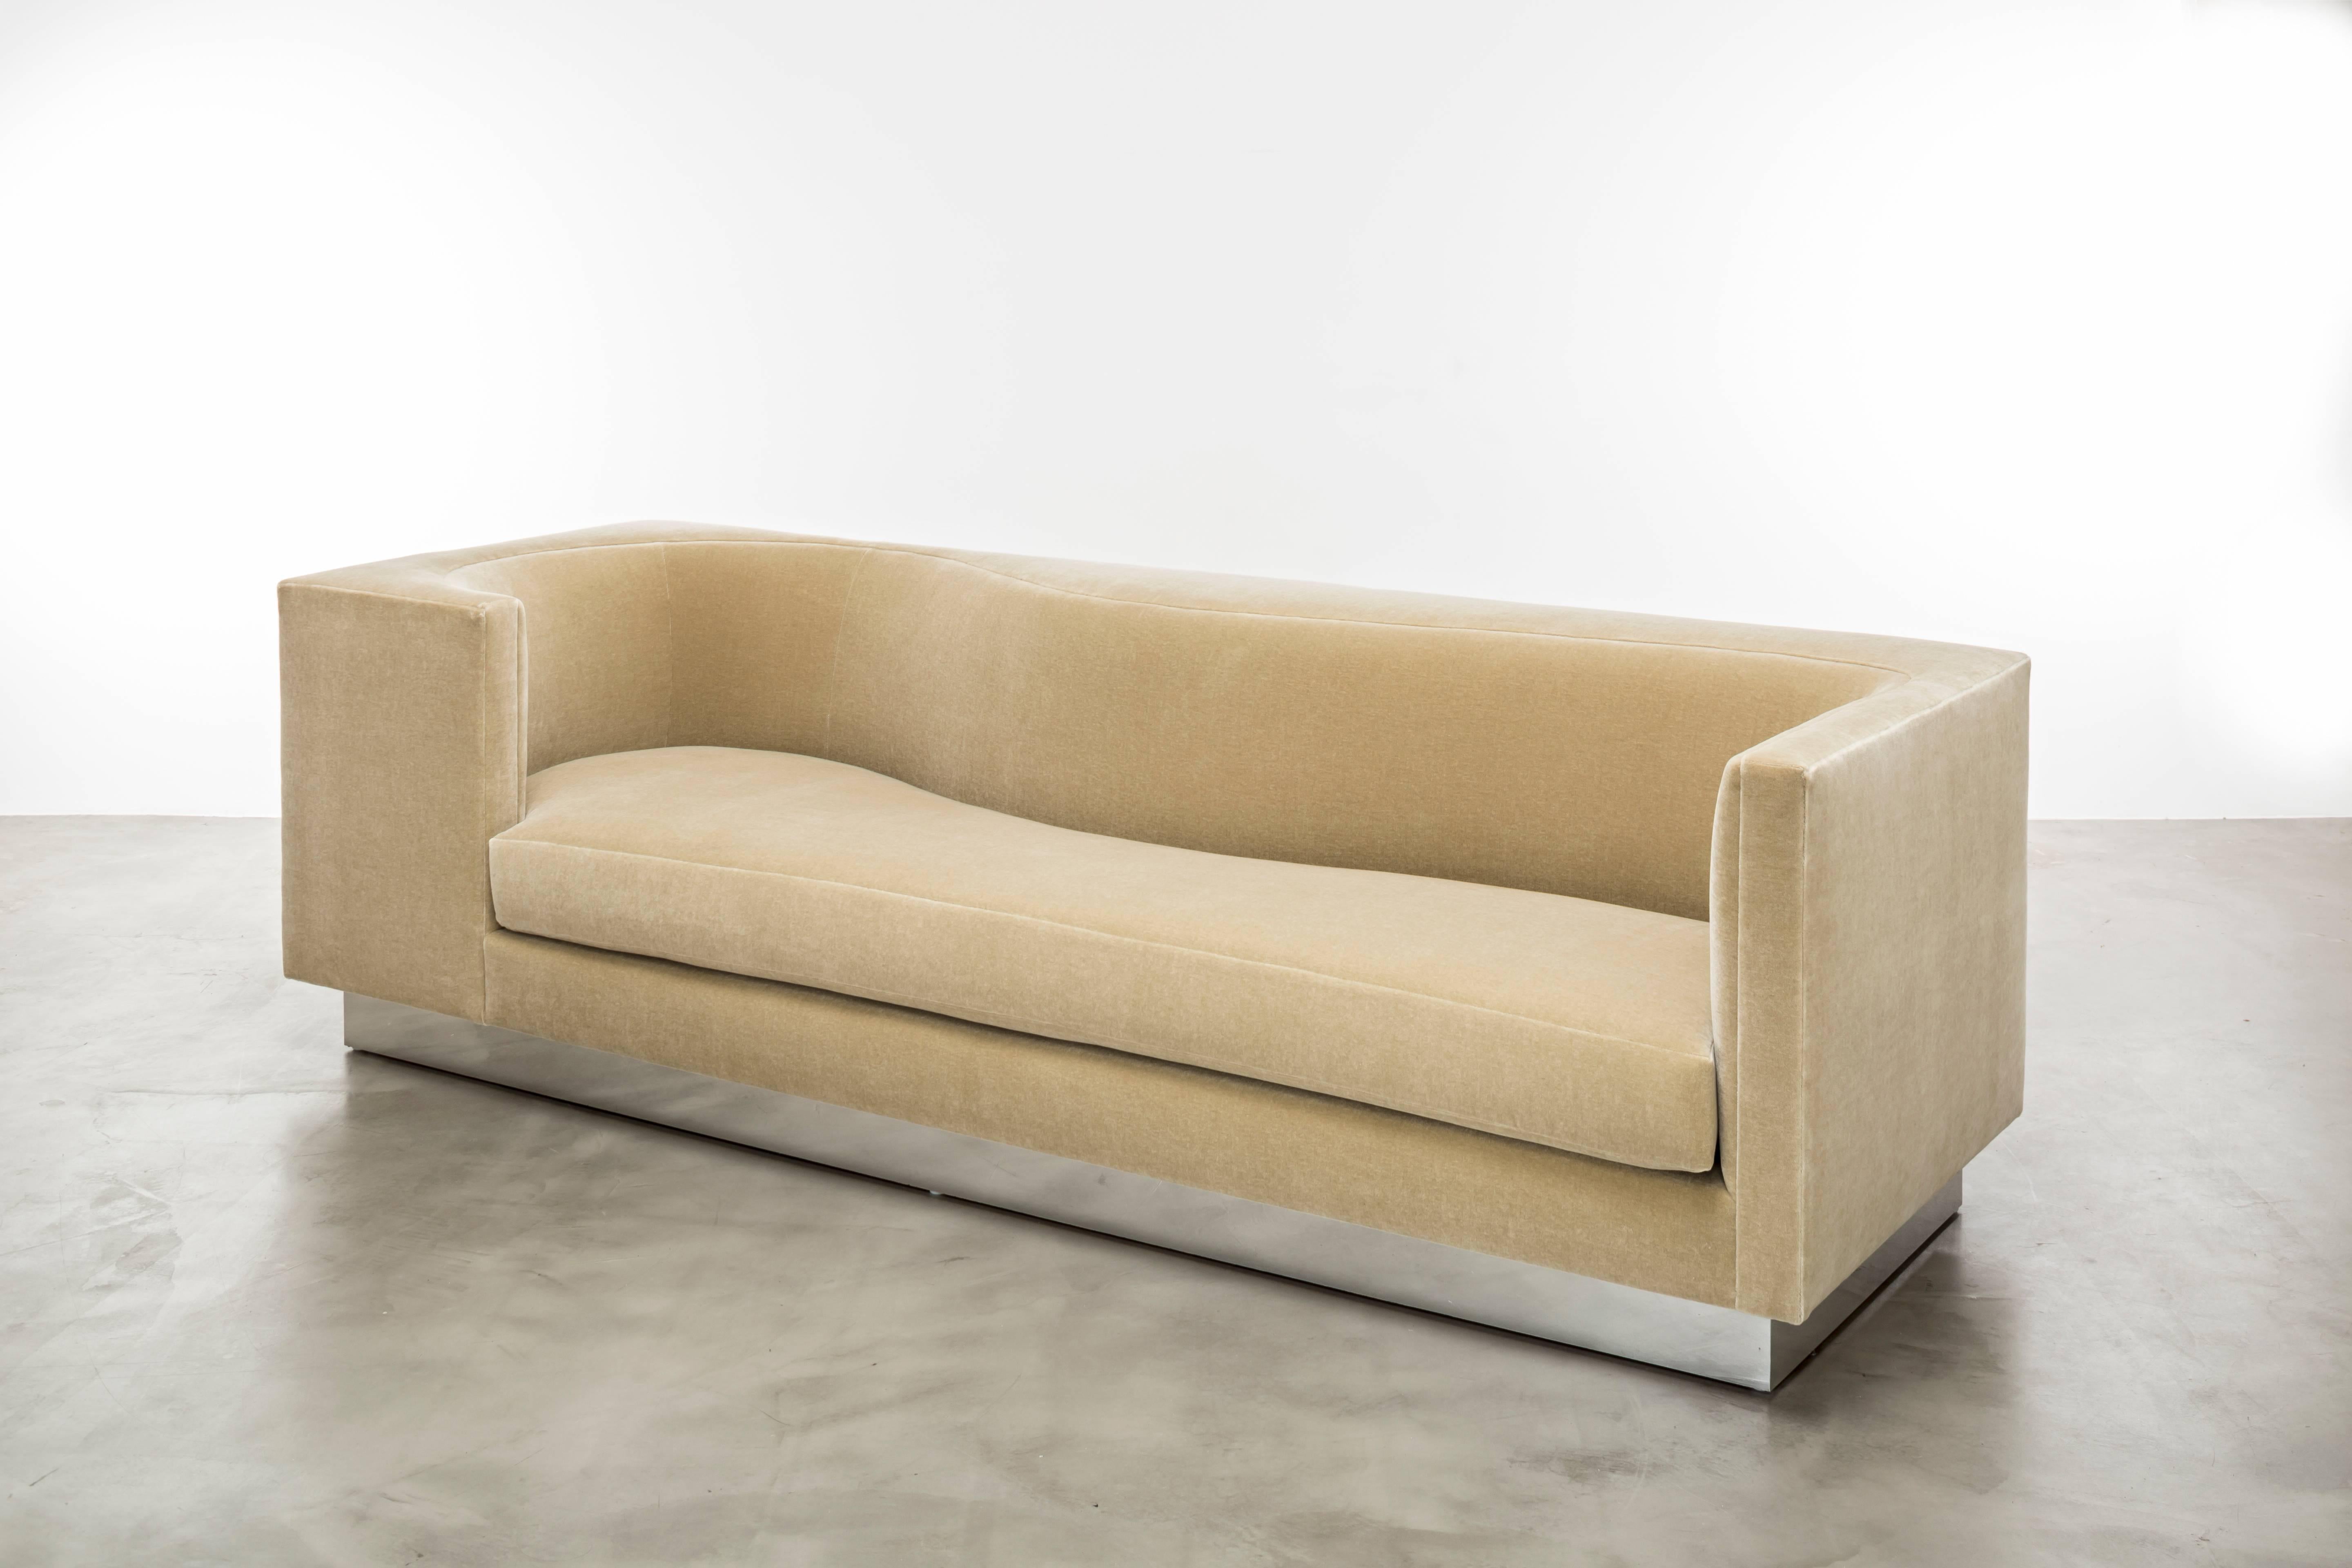 The Laurent Sofa is a luxurious and modern piece of furniture that is both stylish and comfortable. This asymmetrical sofa features a minimal modern rectangular frame with contained curves in its architecture, giving it a unique and eye-catching